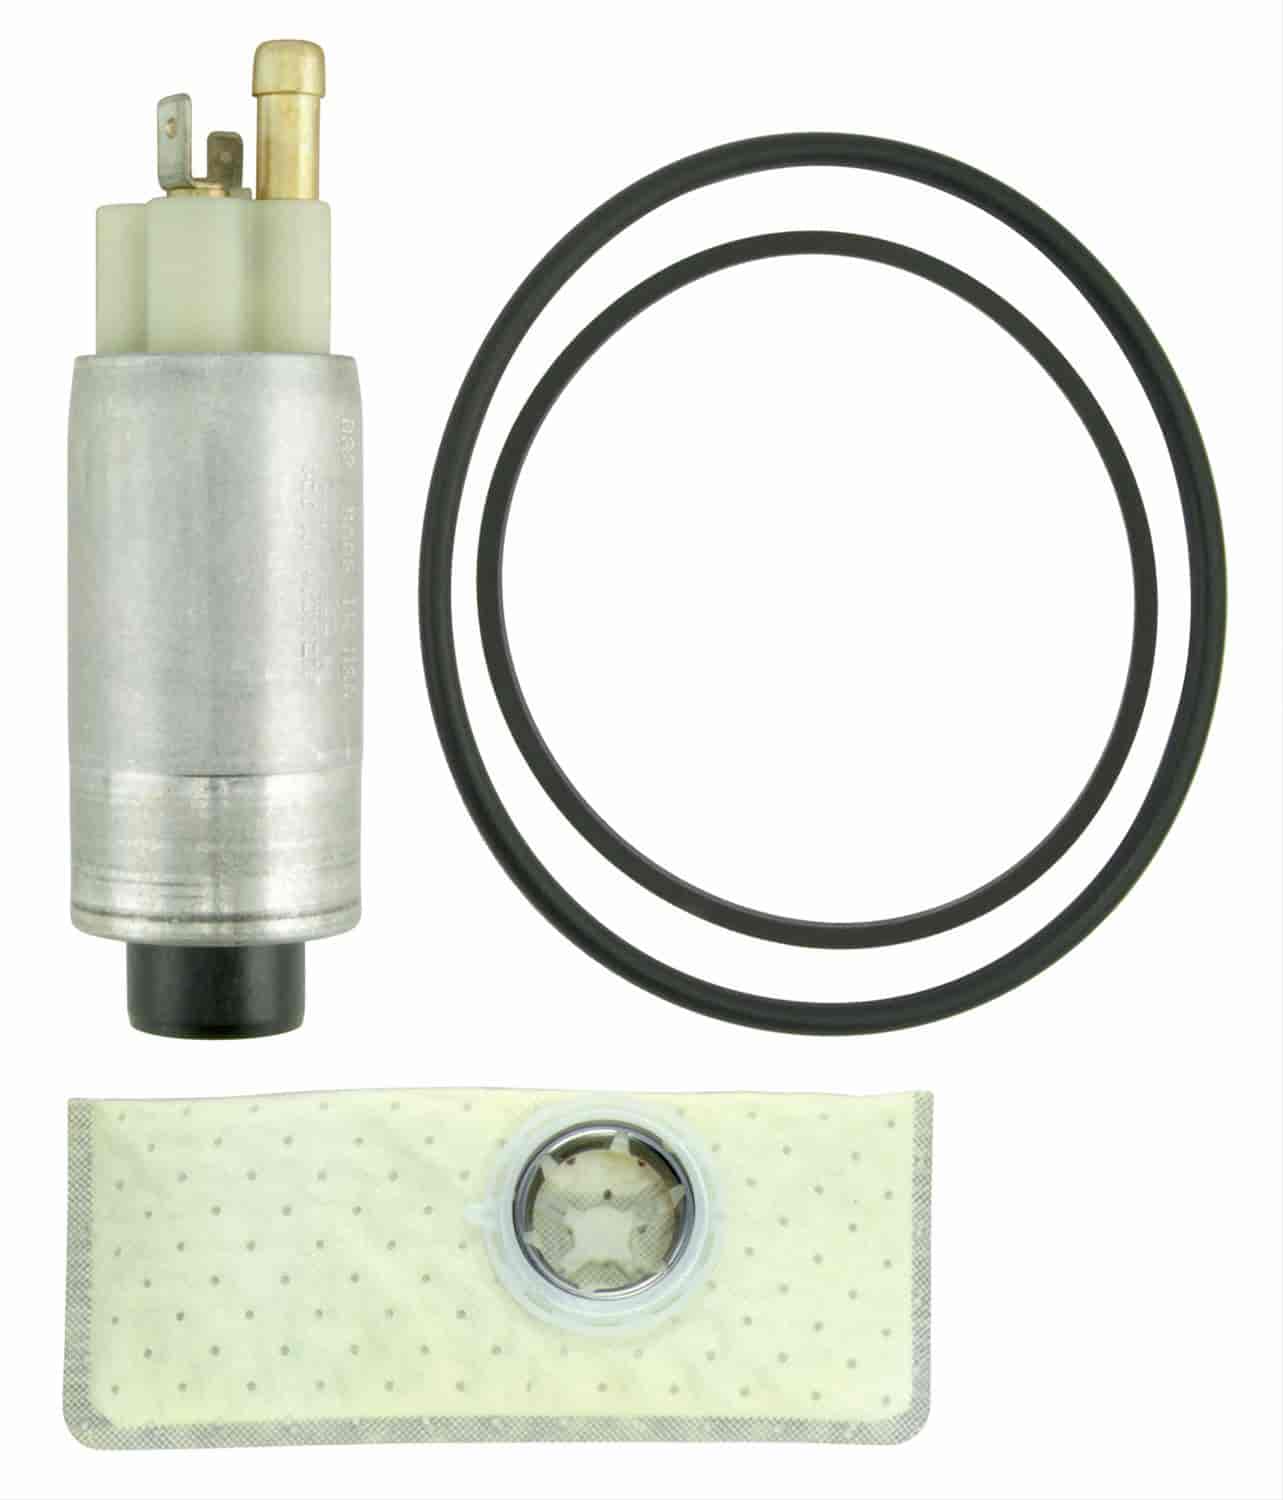 EFI In-Tank Electric Fuel Pump And Strainer Set for 1986-1993 Ford Taurus/Mercury Sable